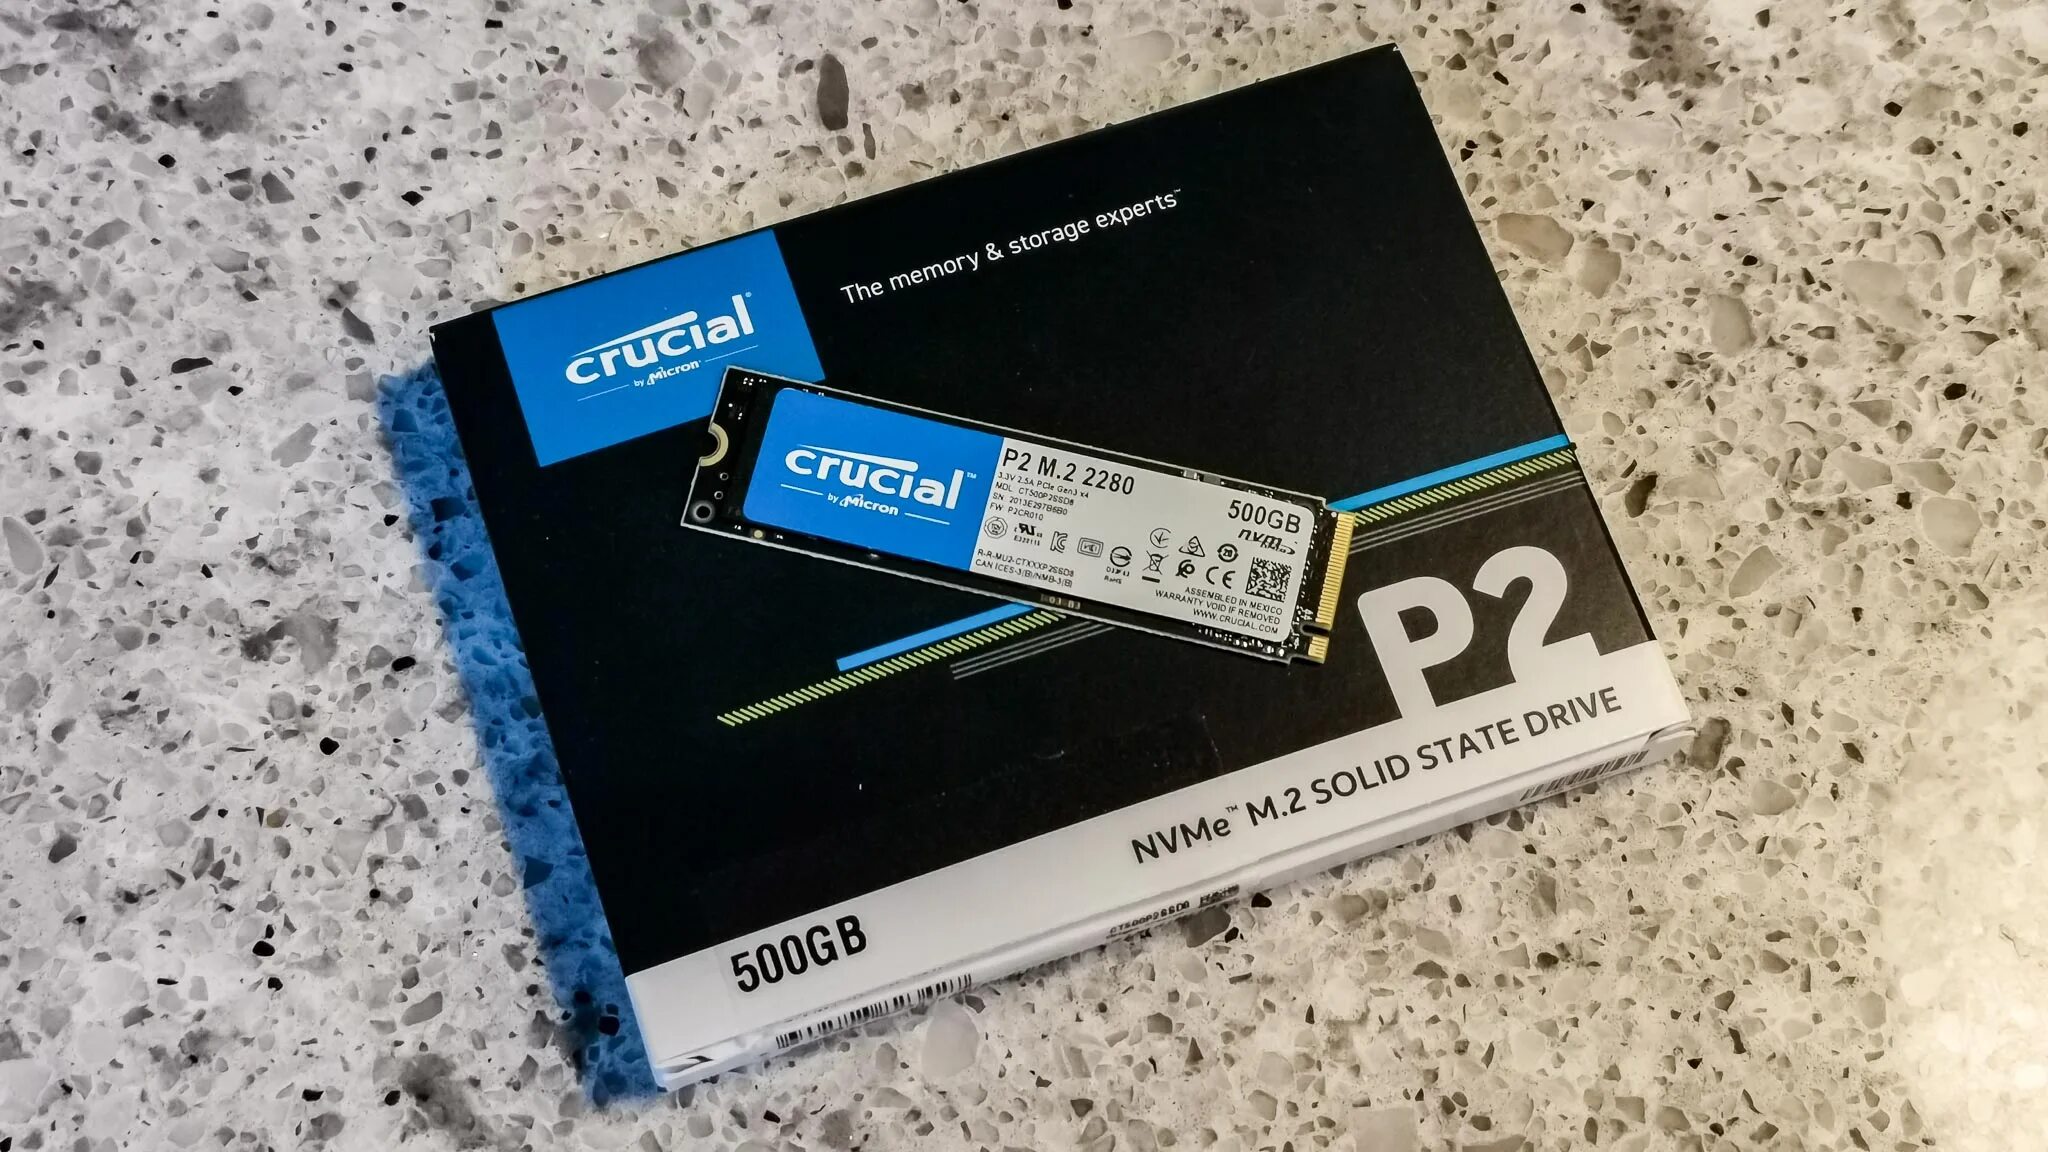 M2 SSD crucial 1tb. Crucial p2 m.2 NVME 1tb. SSD M.2 NVME 250 ГБ crucial p2 ct250p2ssd8. SSD диск crucial p2. Crucial p2 ssd